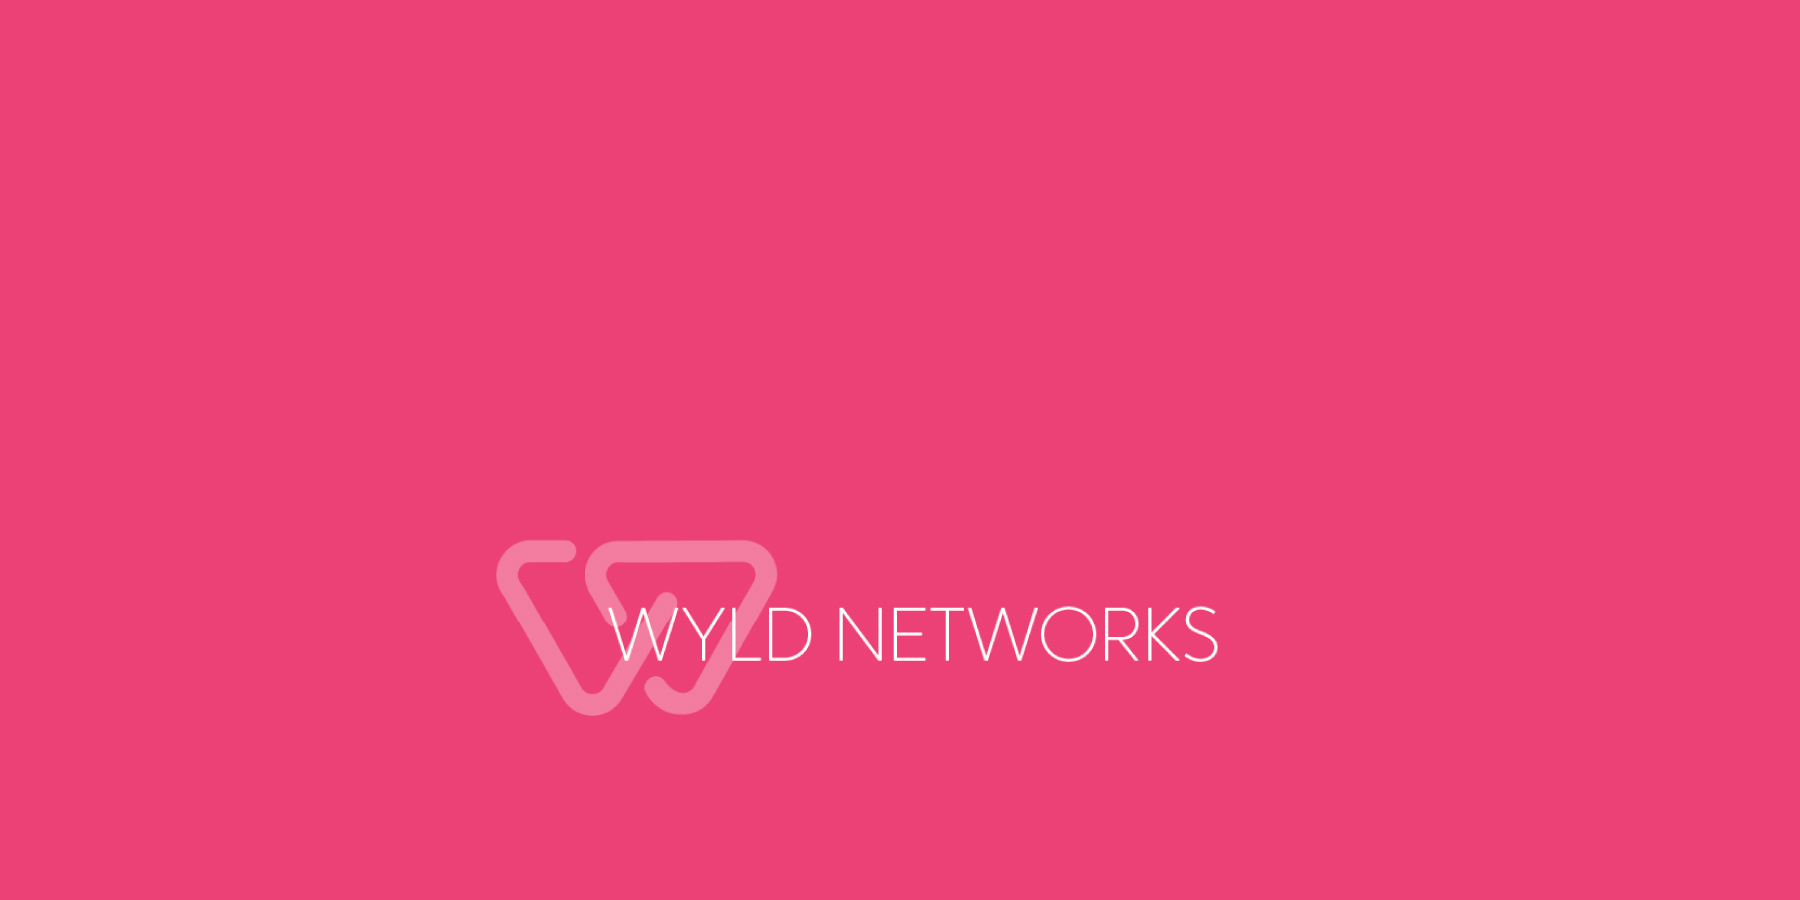 Wyld Networks receives its first order of SEK 0.2 M regarding an order in the energy sector from EAT